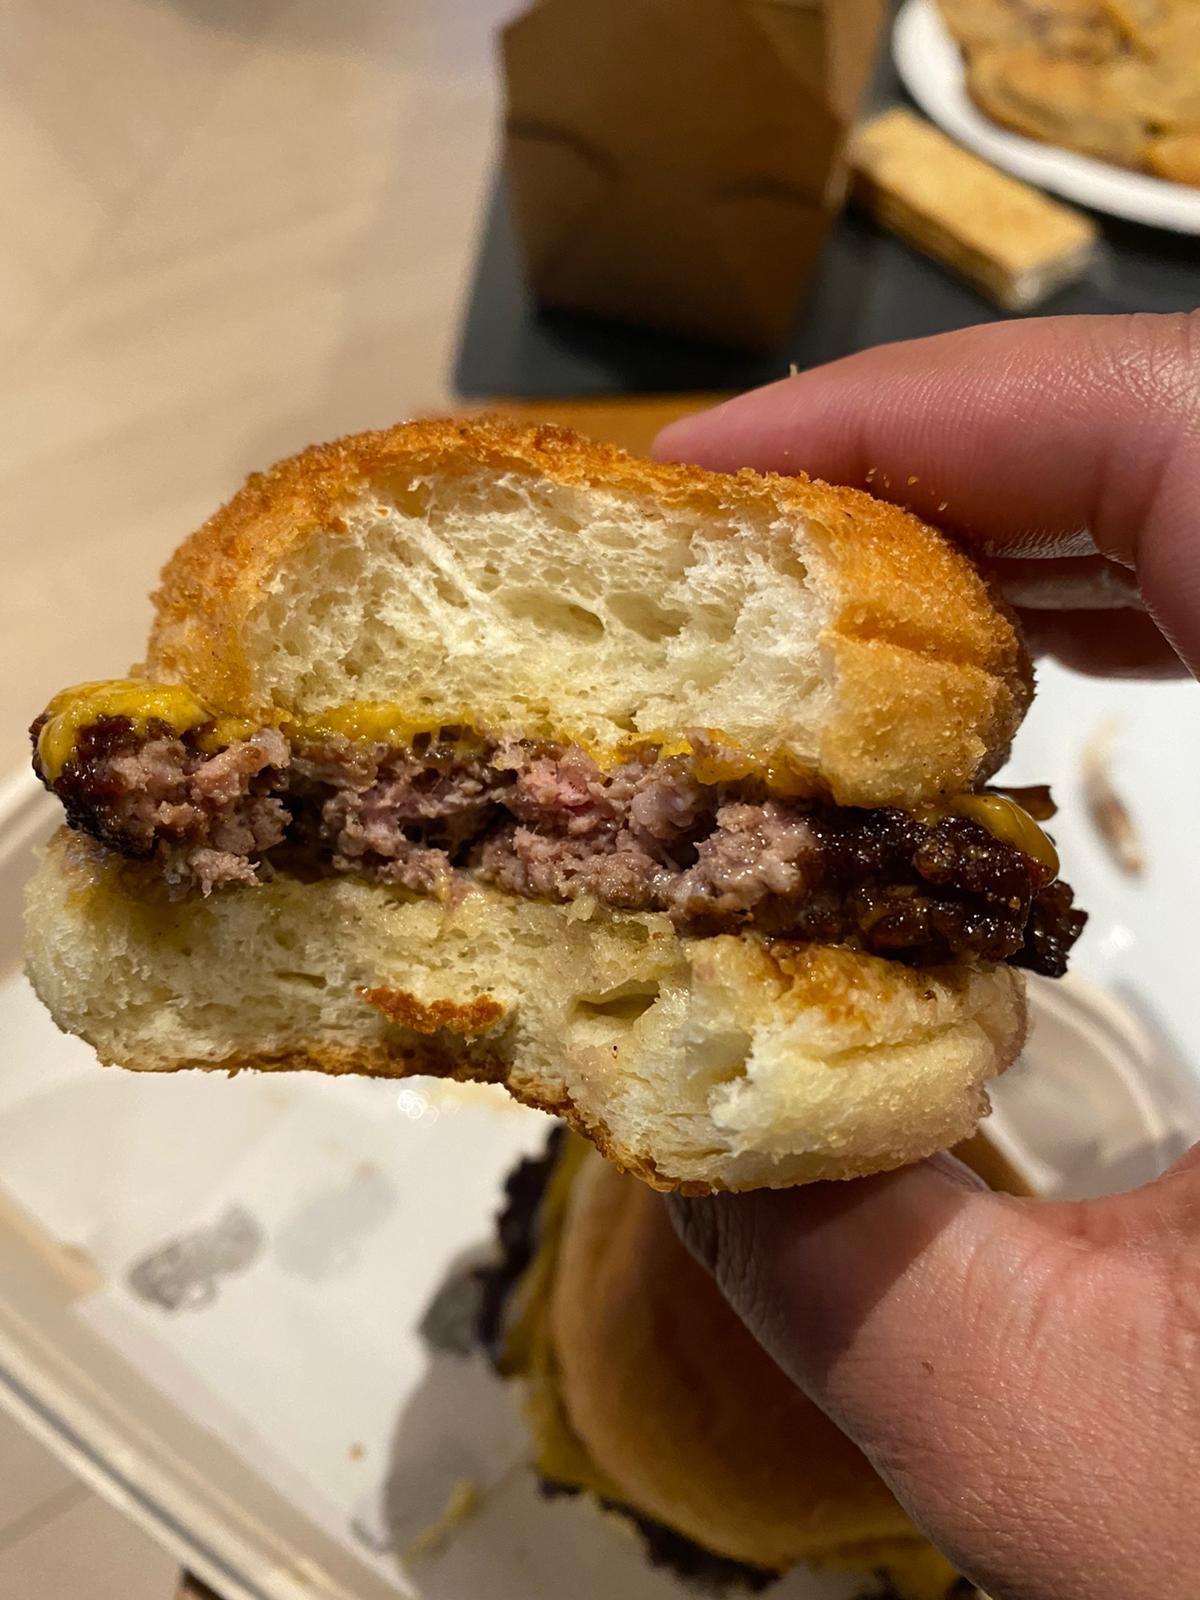 A cross-section of a slider with a bite taken out of it, with pandesal bun, beef burger, burnt onions, and cheese